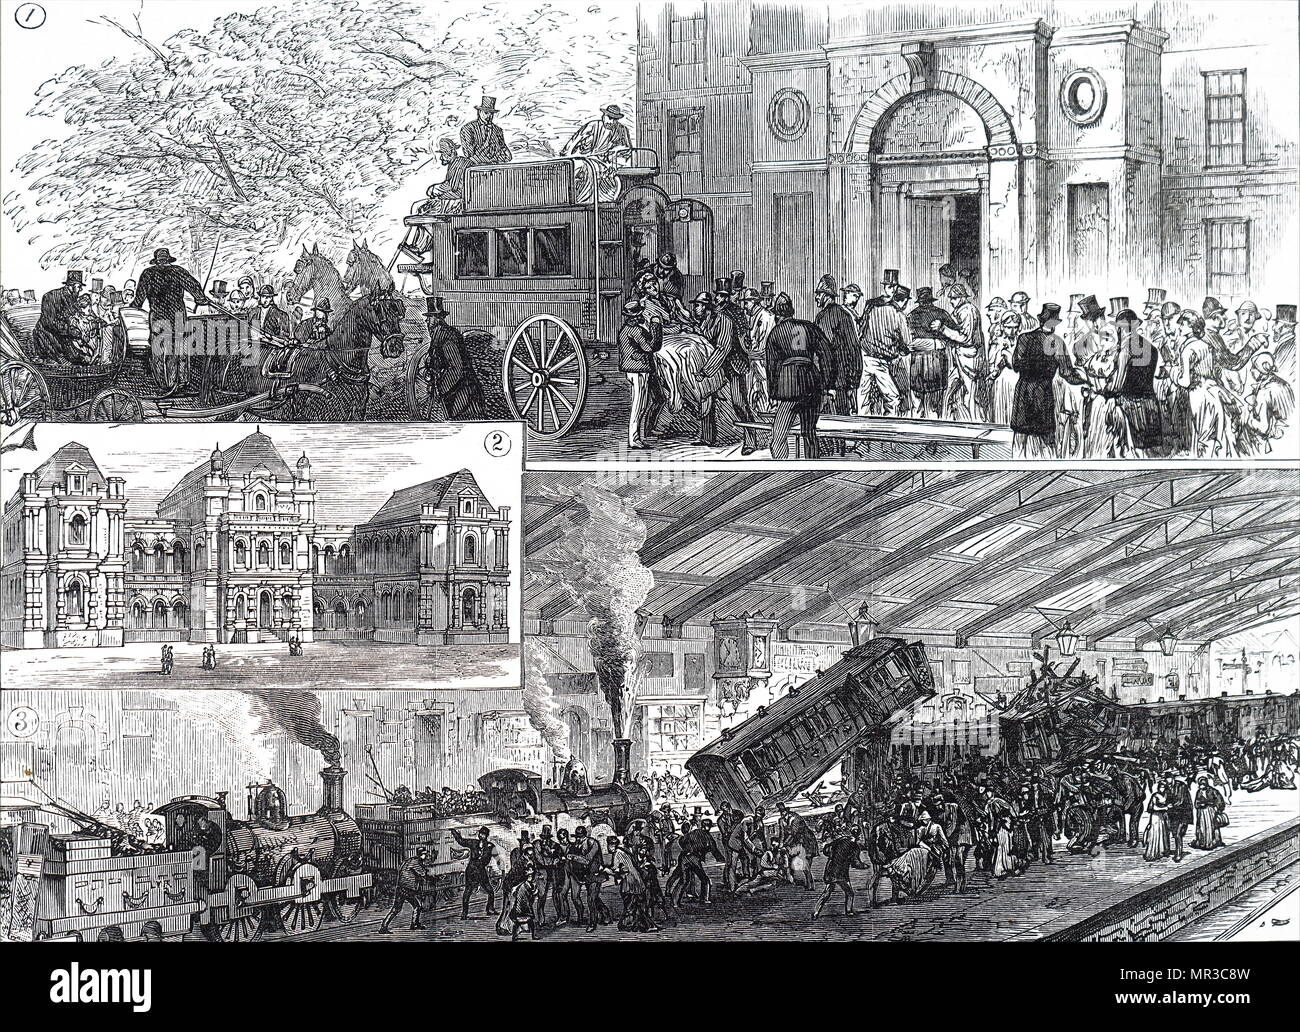 Illustration depicting a railway accident at Blackburn Station in which several people were killed. The Edinburgh to Manchester express ploughed into the Liverpool express which was late in leaving. Dated 19th century Stock Photo